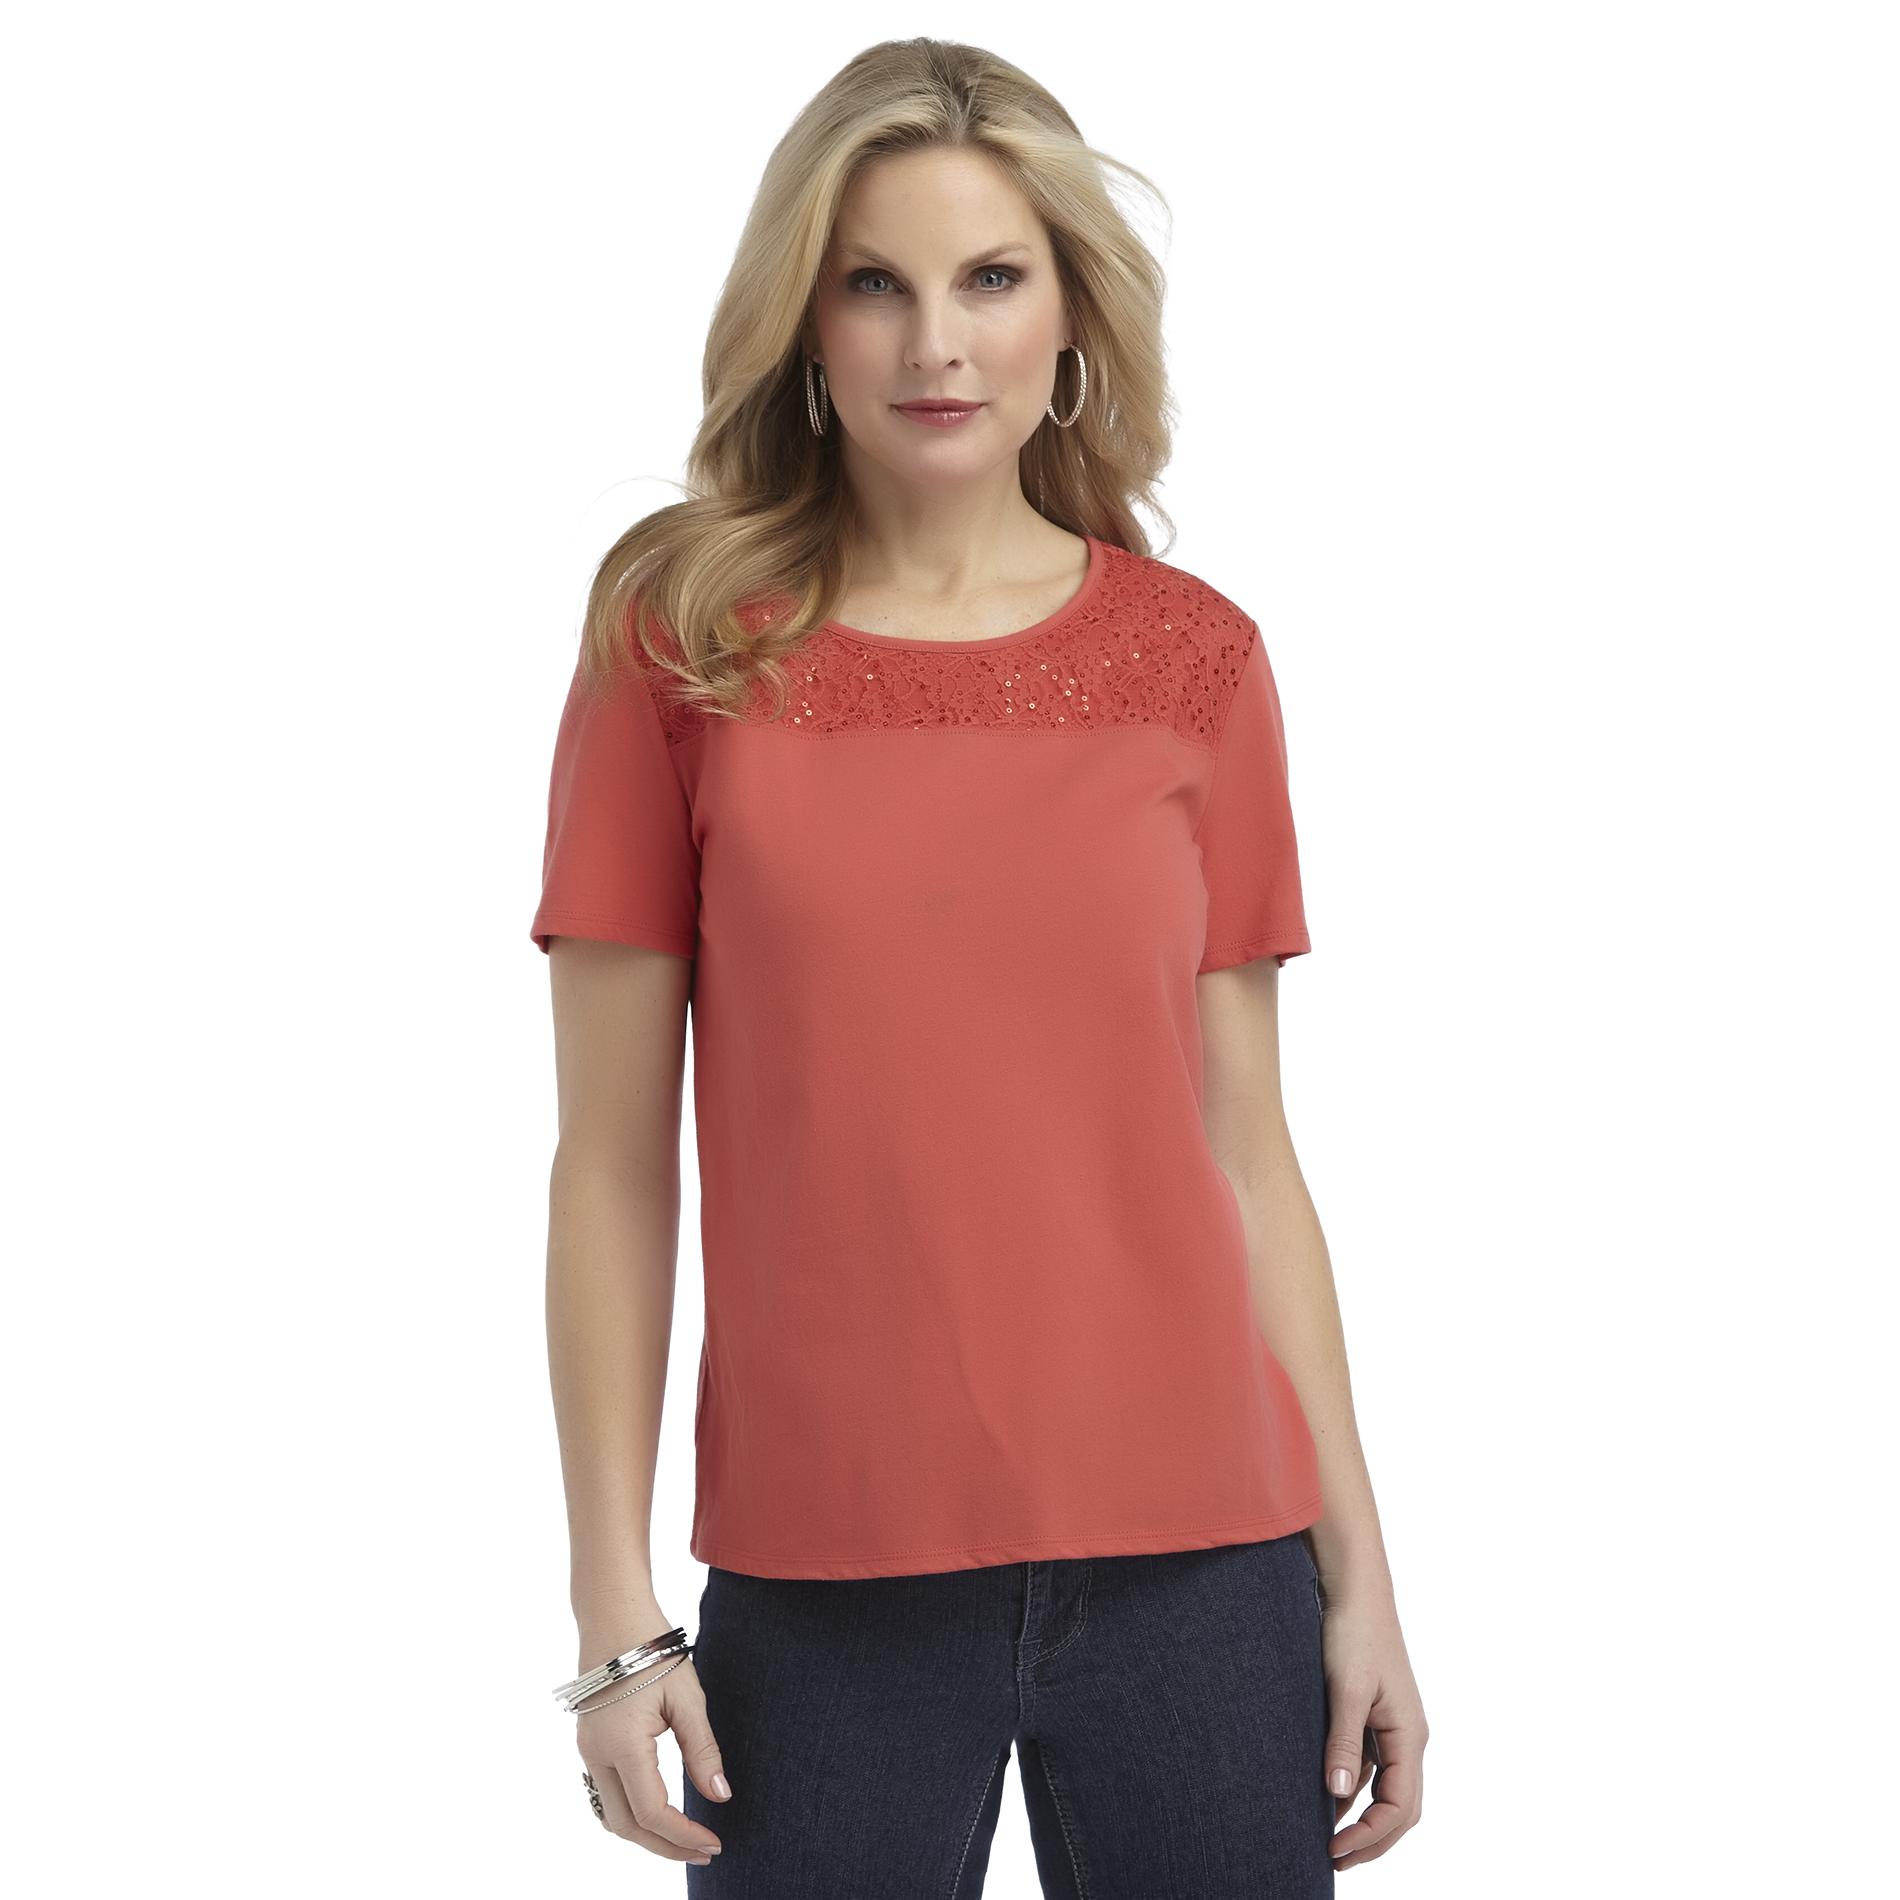 Jaclyn Smith Women's Sequin & Lace T-Shirt